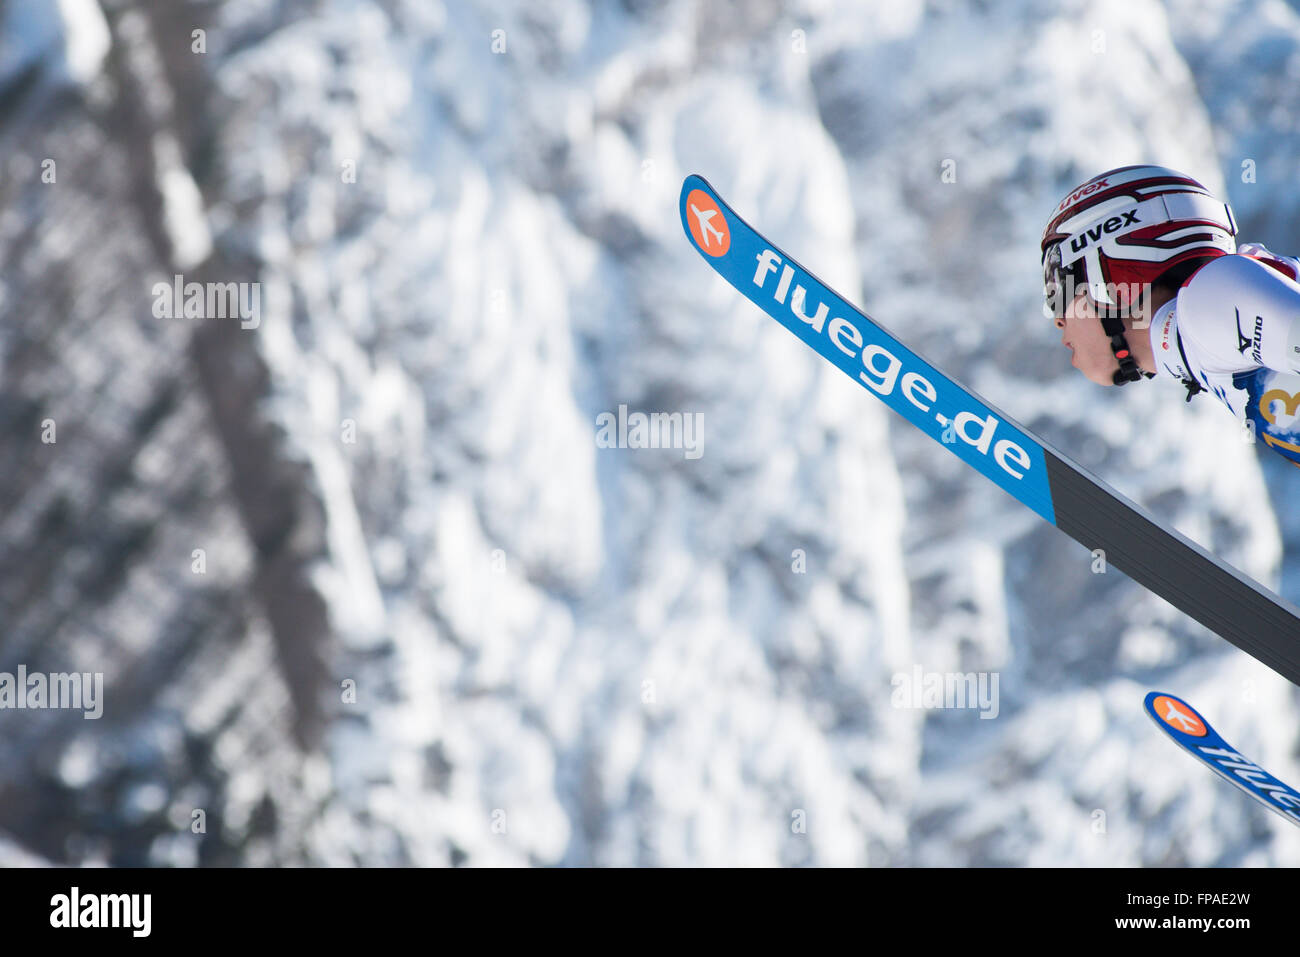 Planica, Slovenia. 18th Mar, 2016. Ryoyu Kobayashi of Japan competes during Planica FIS Ski Jumping World Cup finals on the March 18, 2016 in Planica, Slovenia. © Rok Rakun/Pacific Press/Alamy Live News Stock Photo